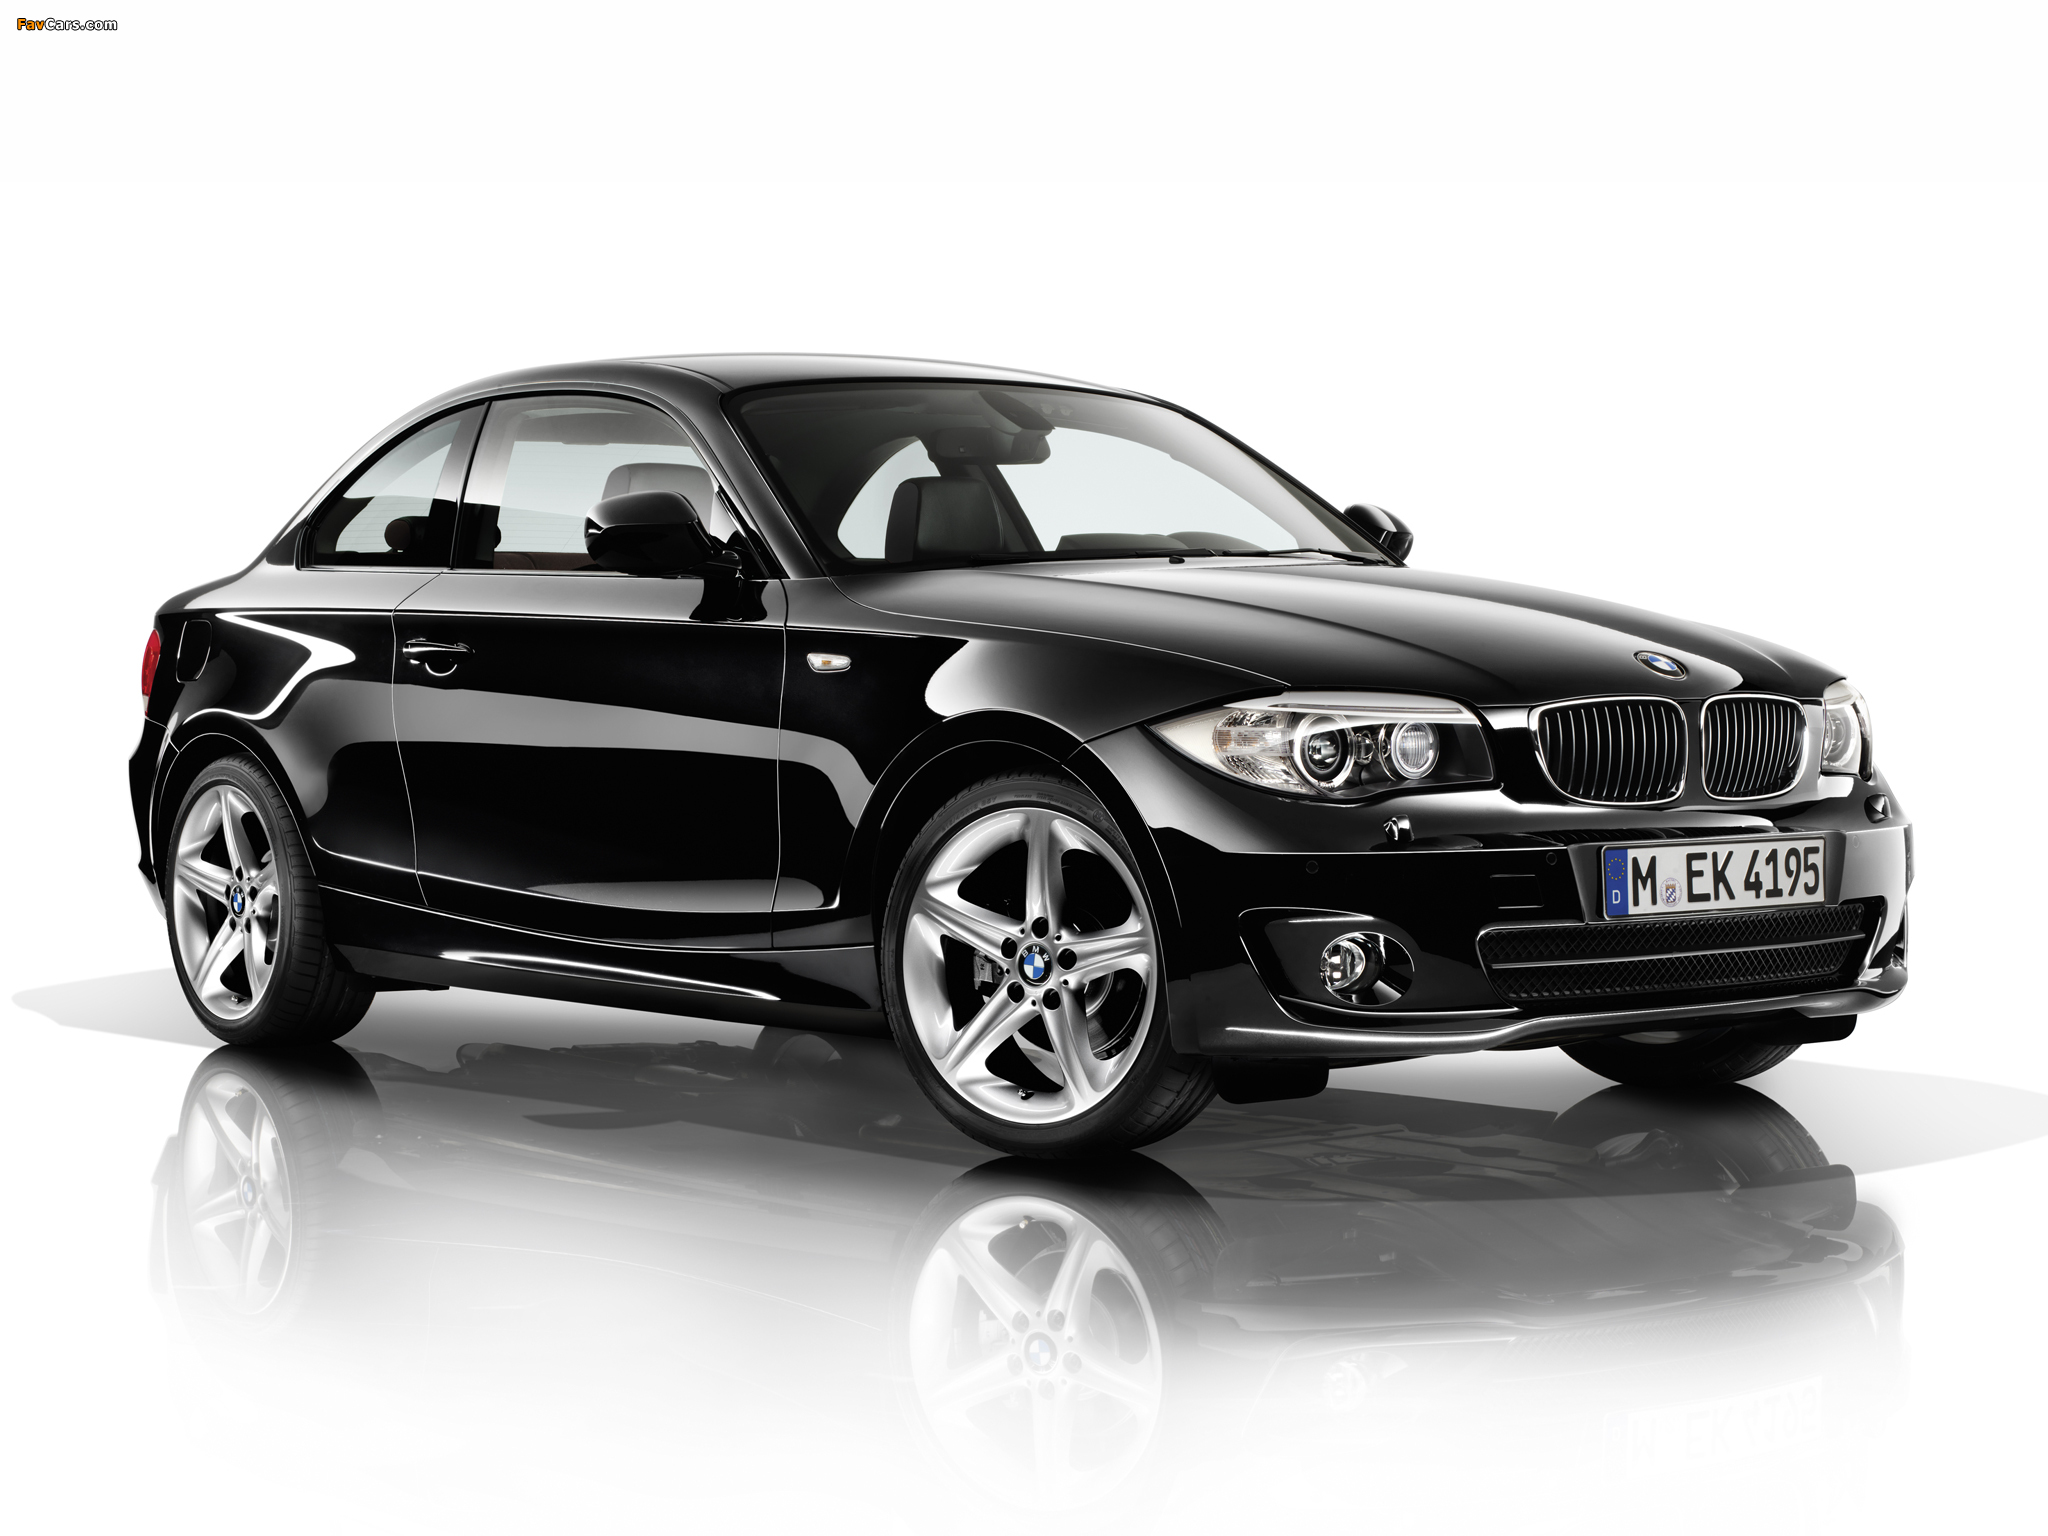 BMW 120d Coupe (E82) 2011 pictures (2048 x 1536)